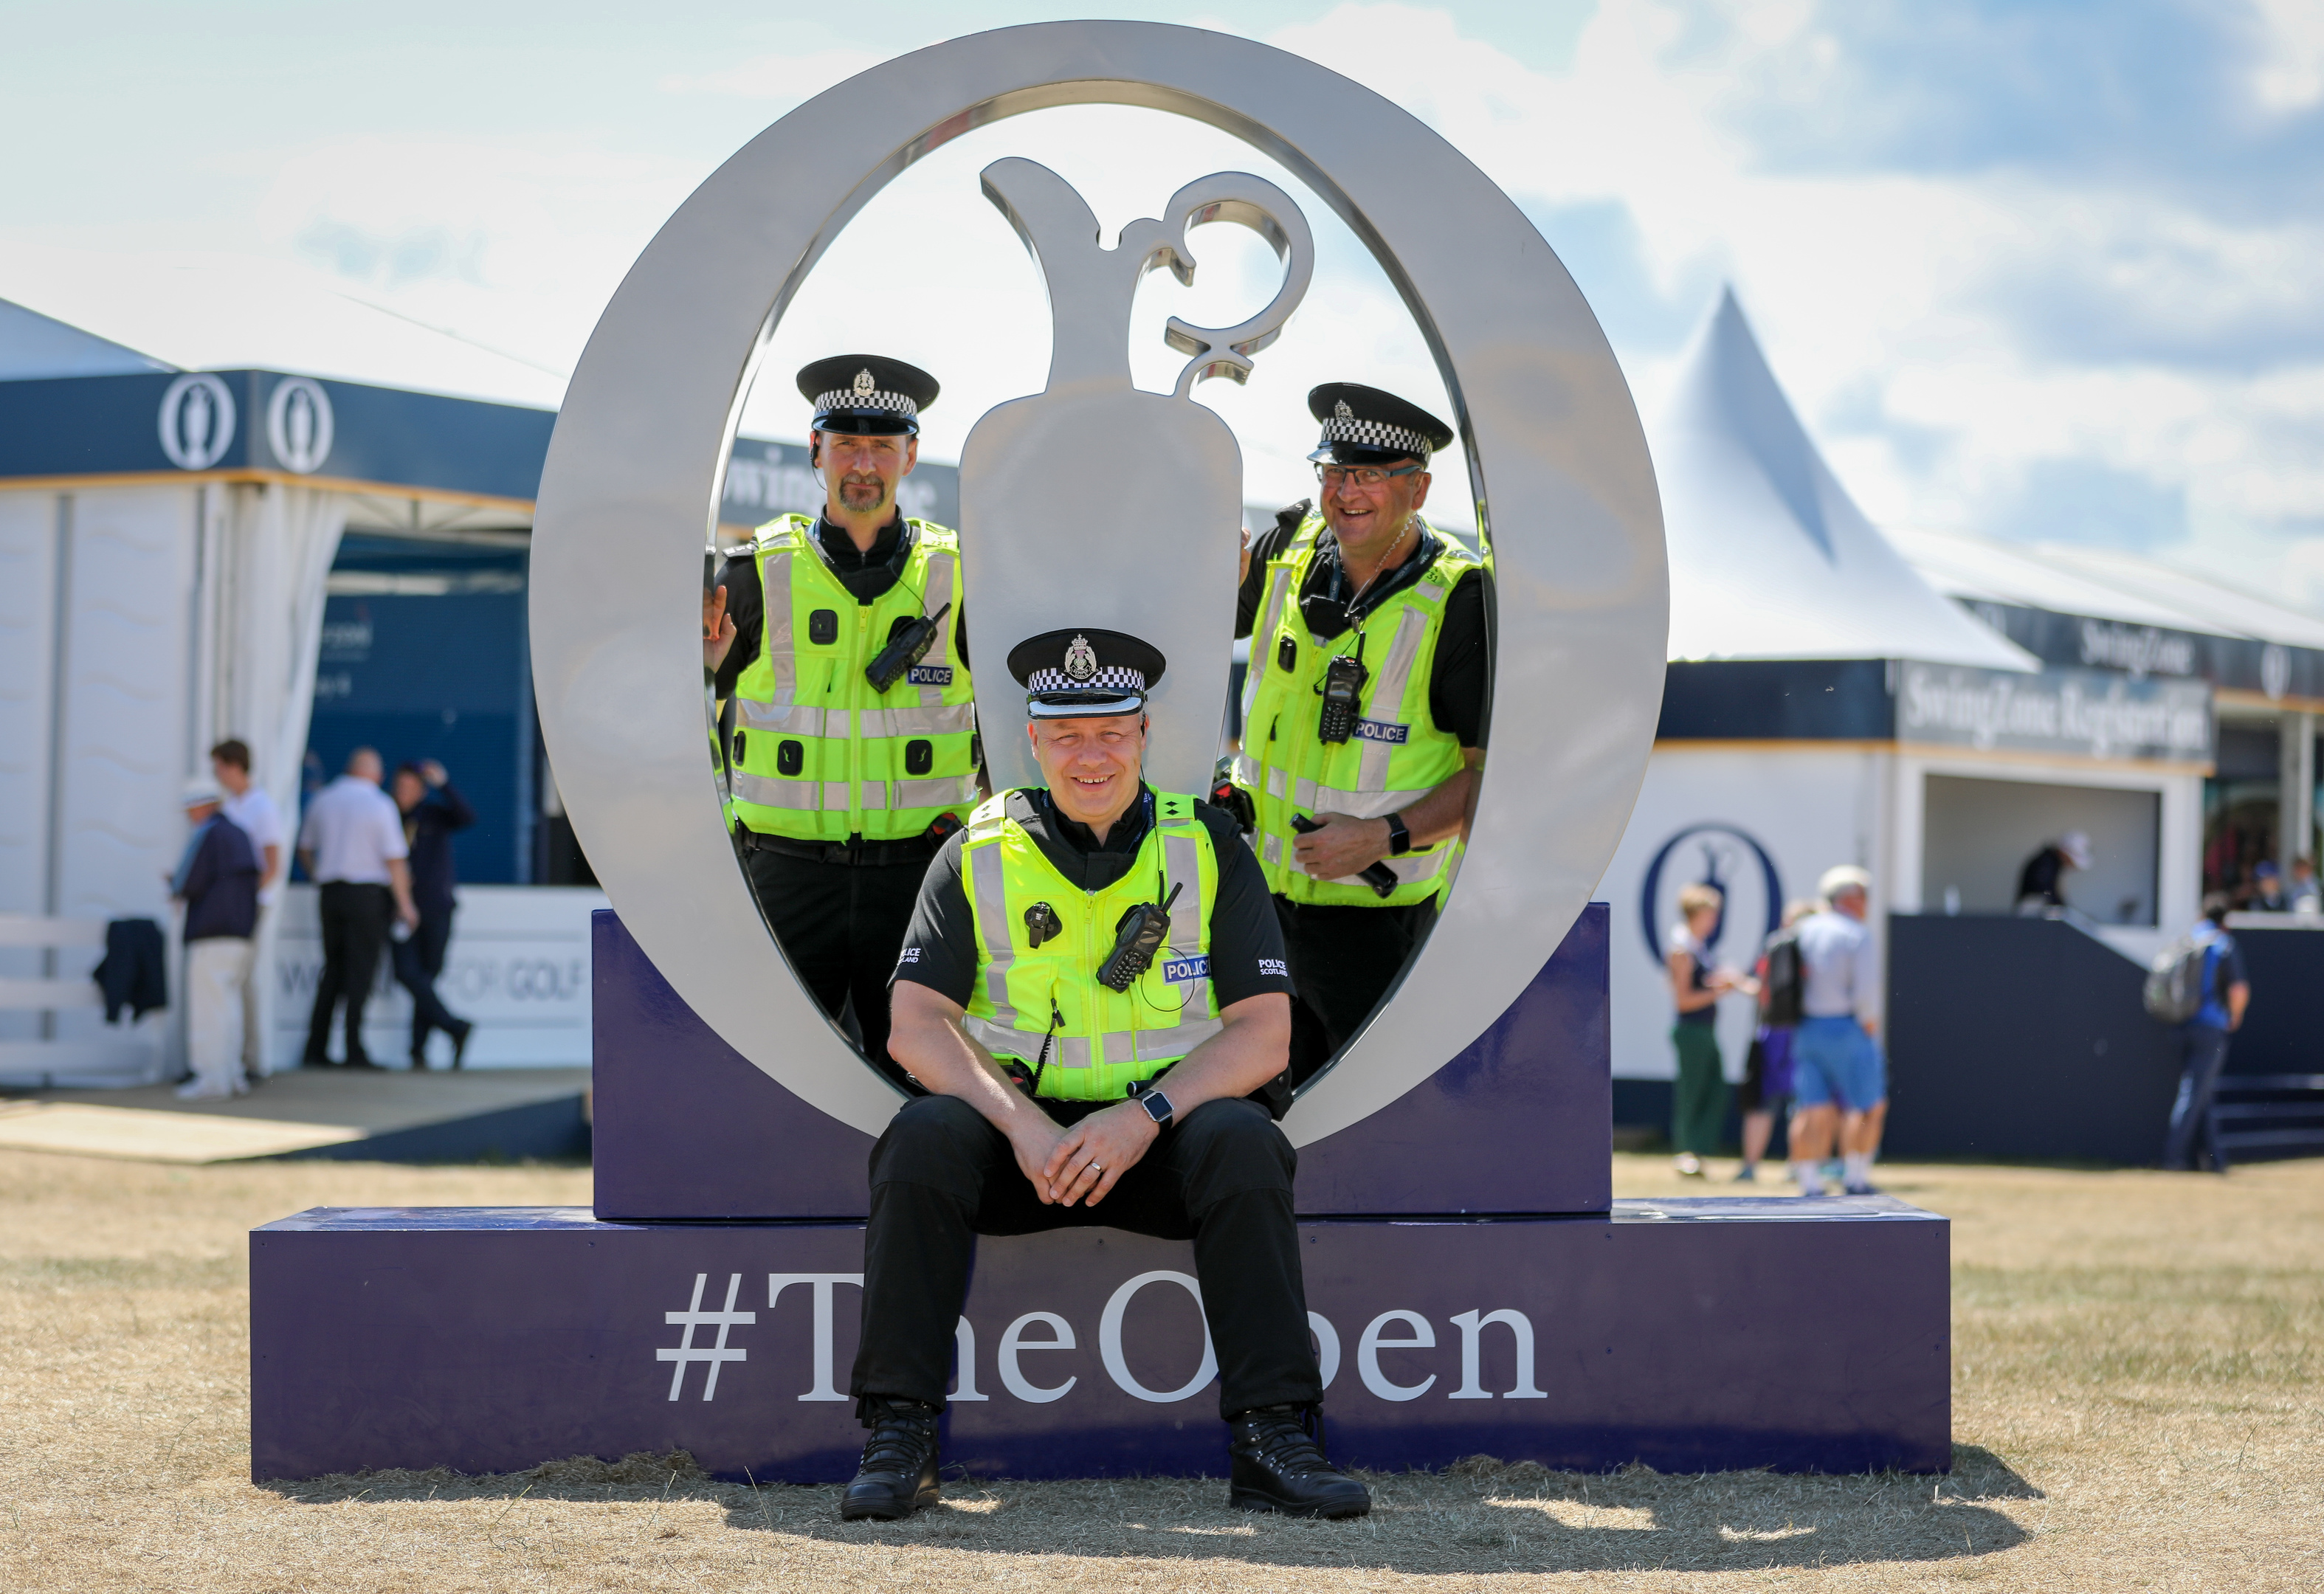 Sgt Peter Lorrain-Smith, Insp Stephen Hunter and Sgt Terry Reid in the tented village at The Open.